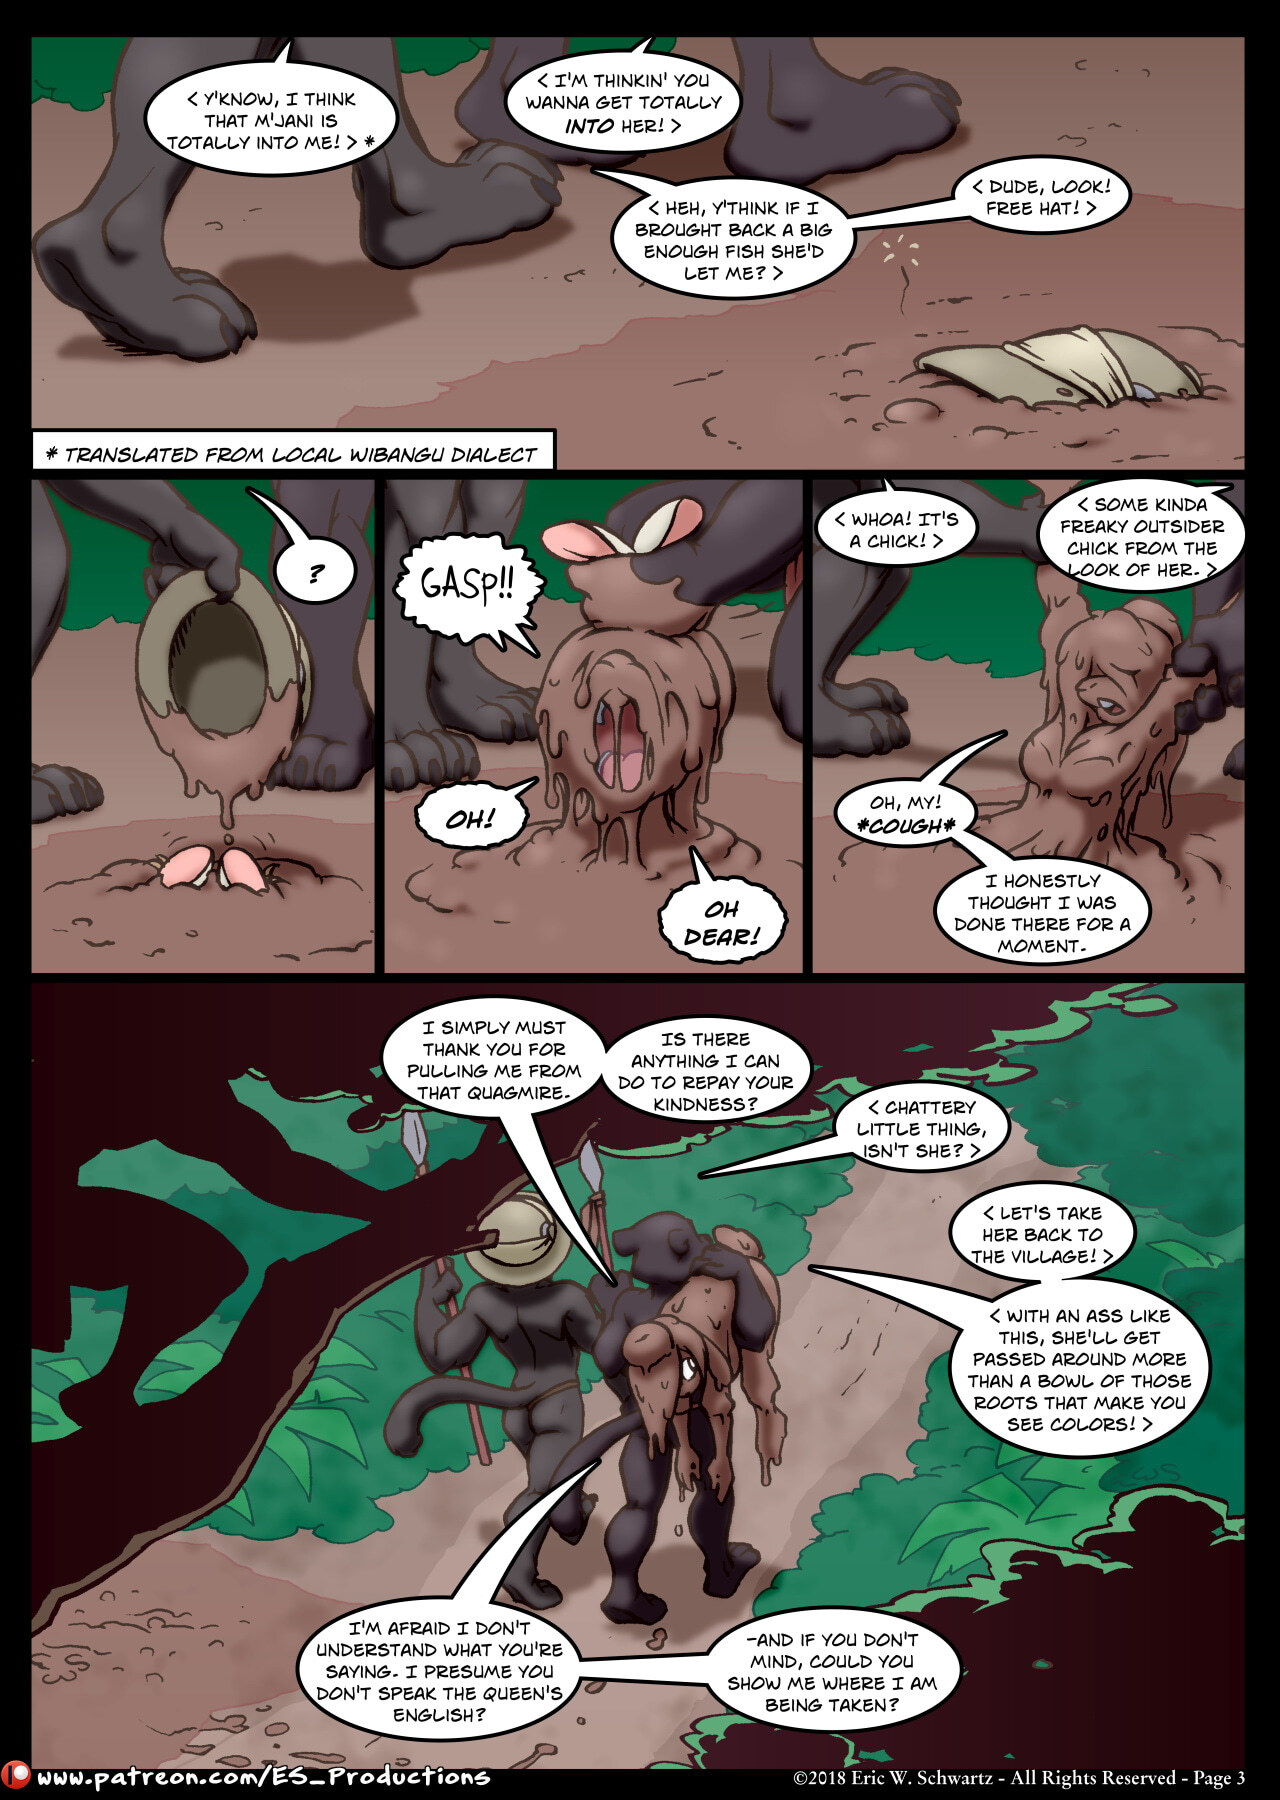 The Misadventures of Jane Cottontail - Page 4